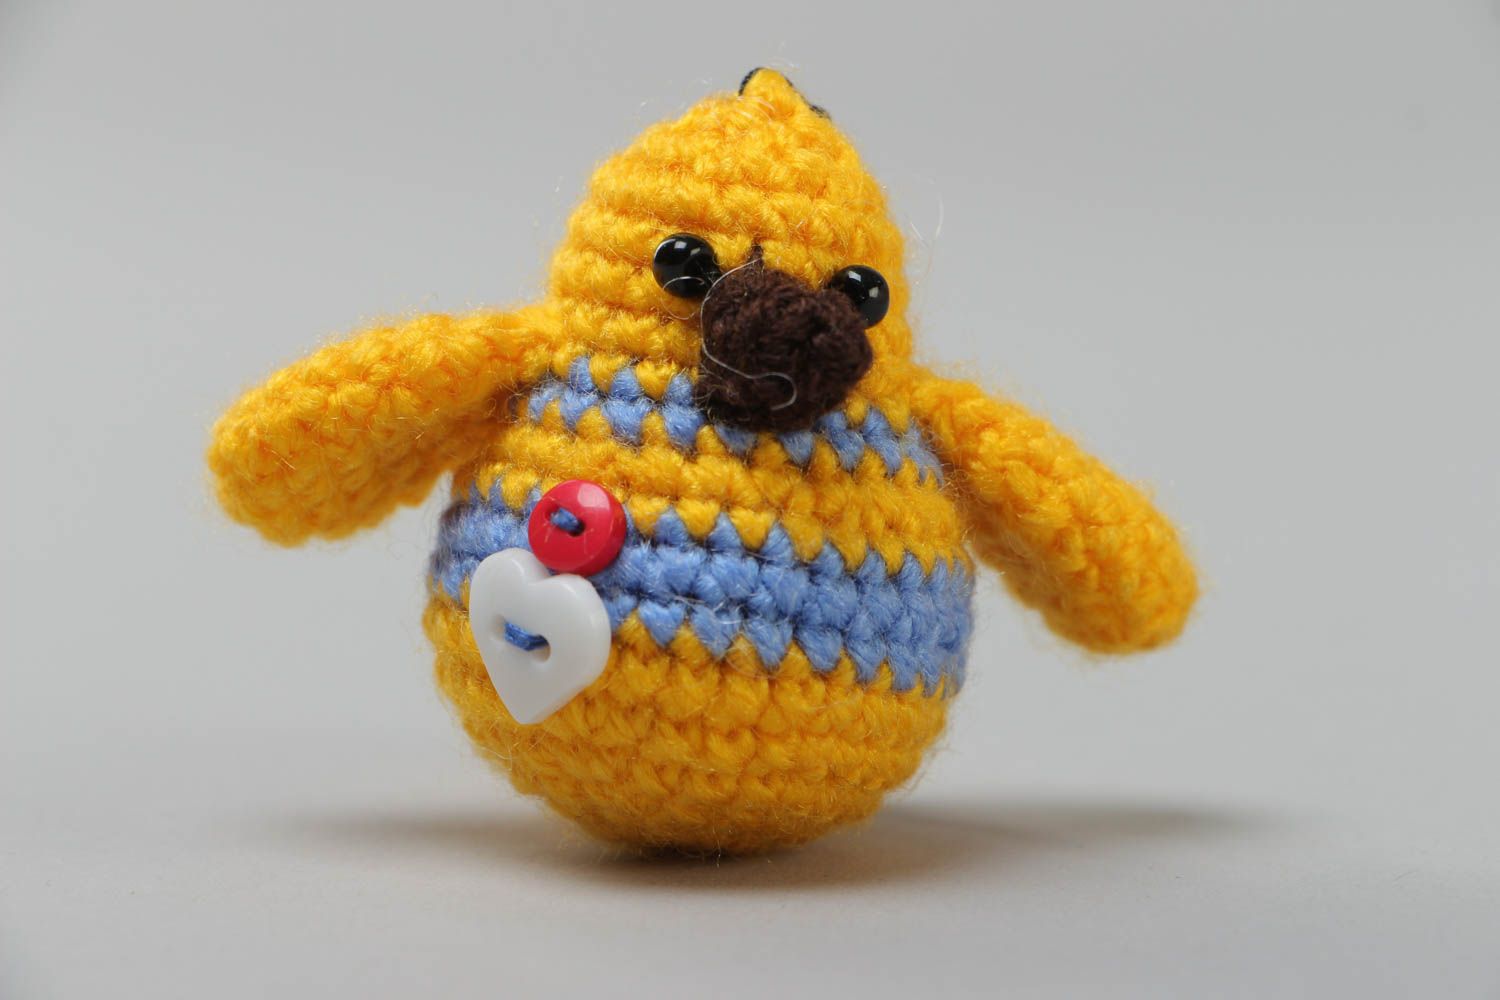 Handmade crocheted soft toy keychain in the shape of small yellow chicken photo 3